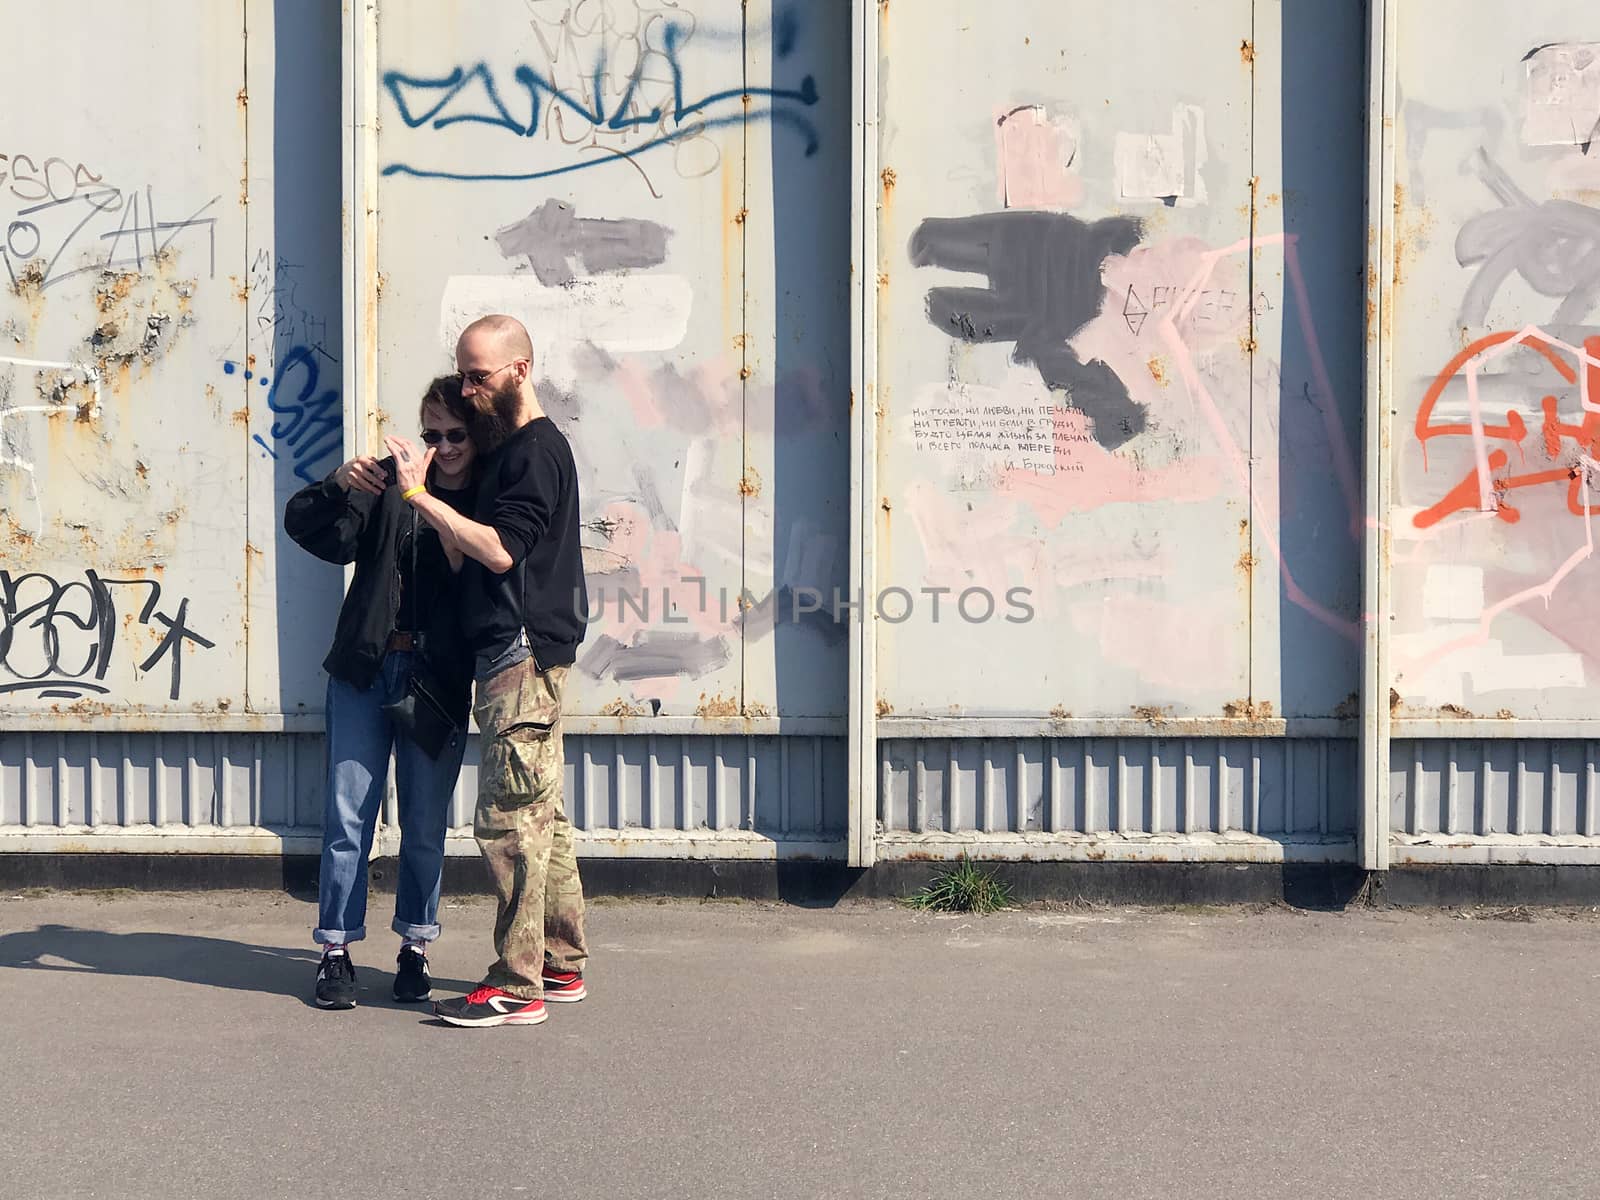 Kiev, Ukraine - April 04, 2017: Happy couple taking a picture on a wall background with graffiti